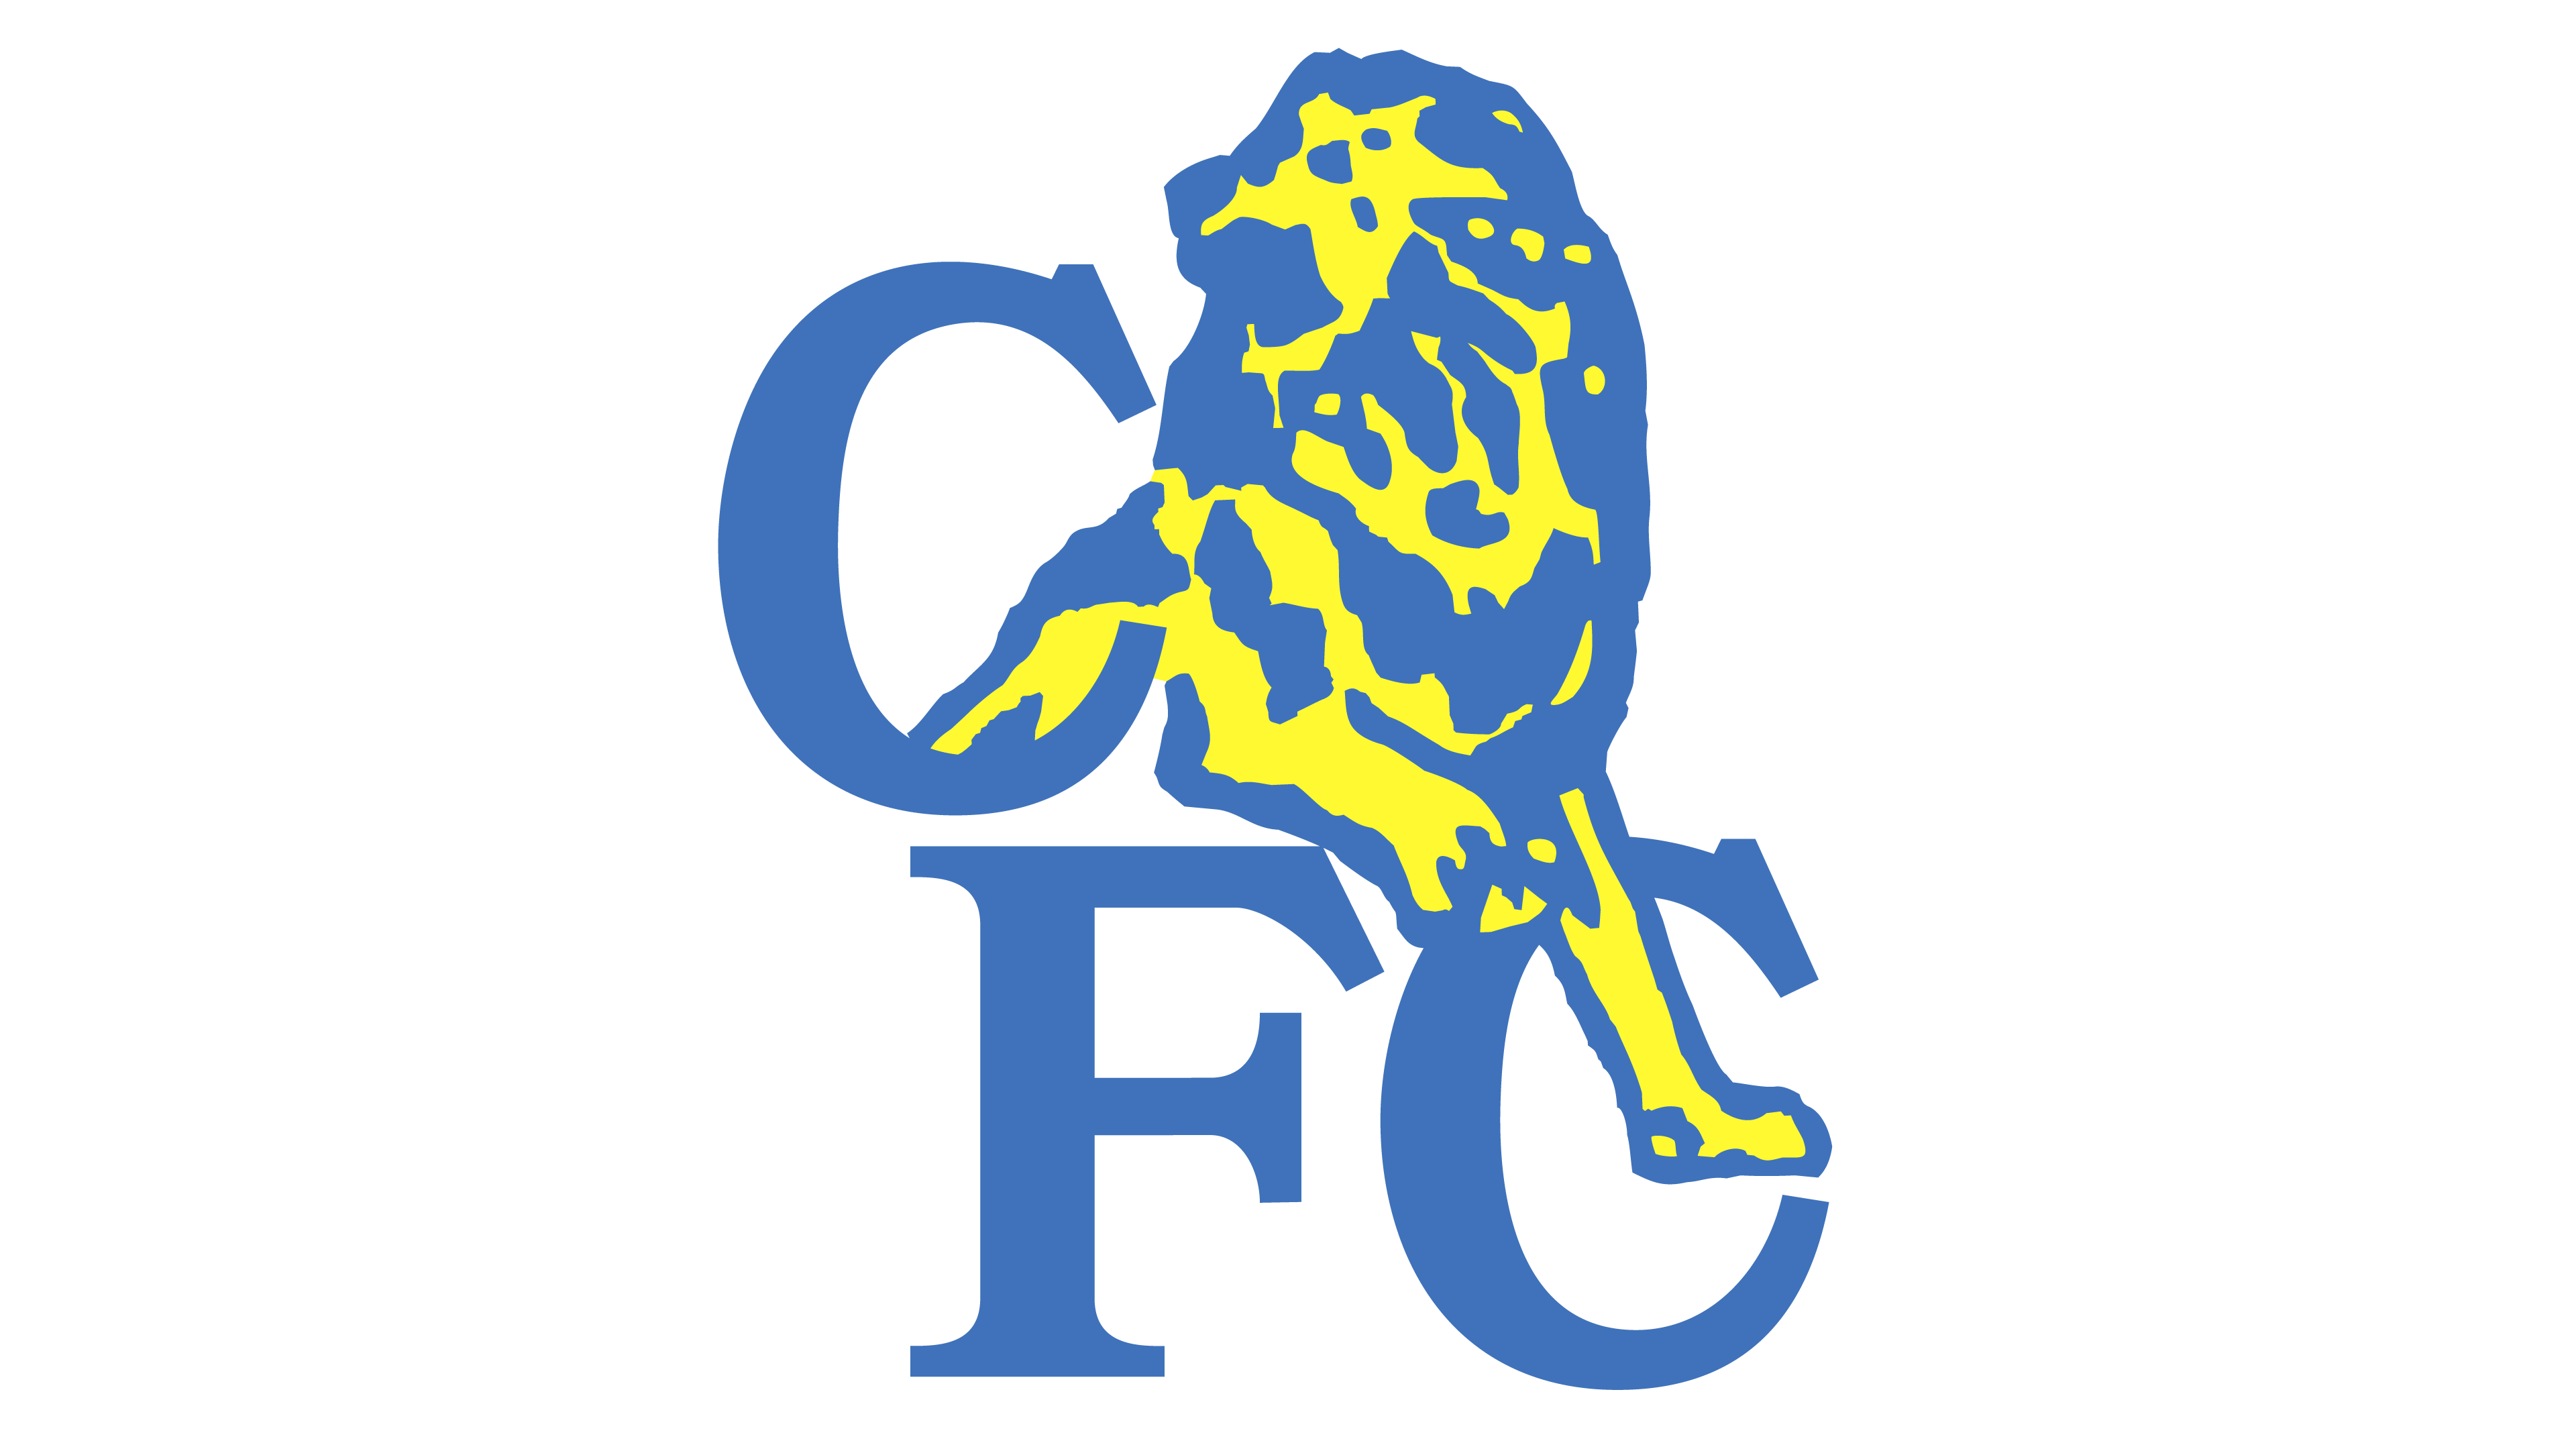 FC Logo - Chelsea logo History of the Team Name and emblem